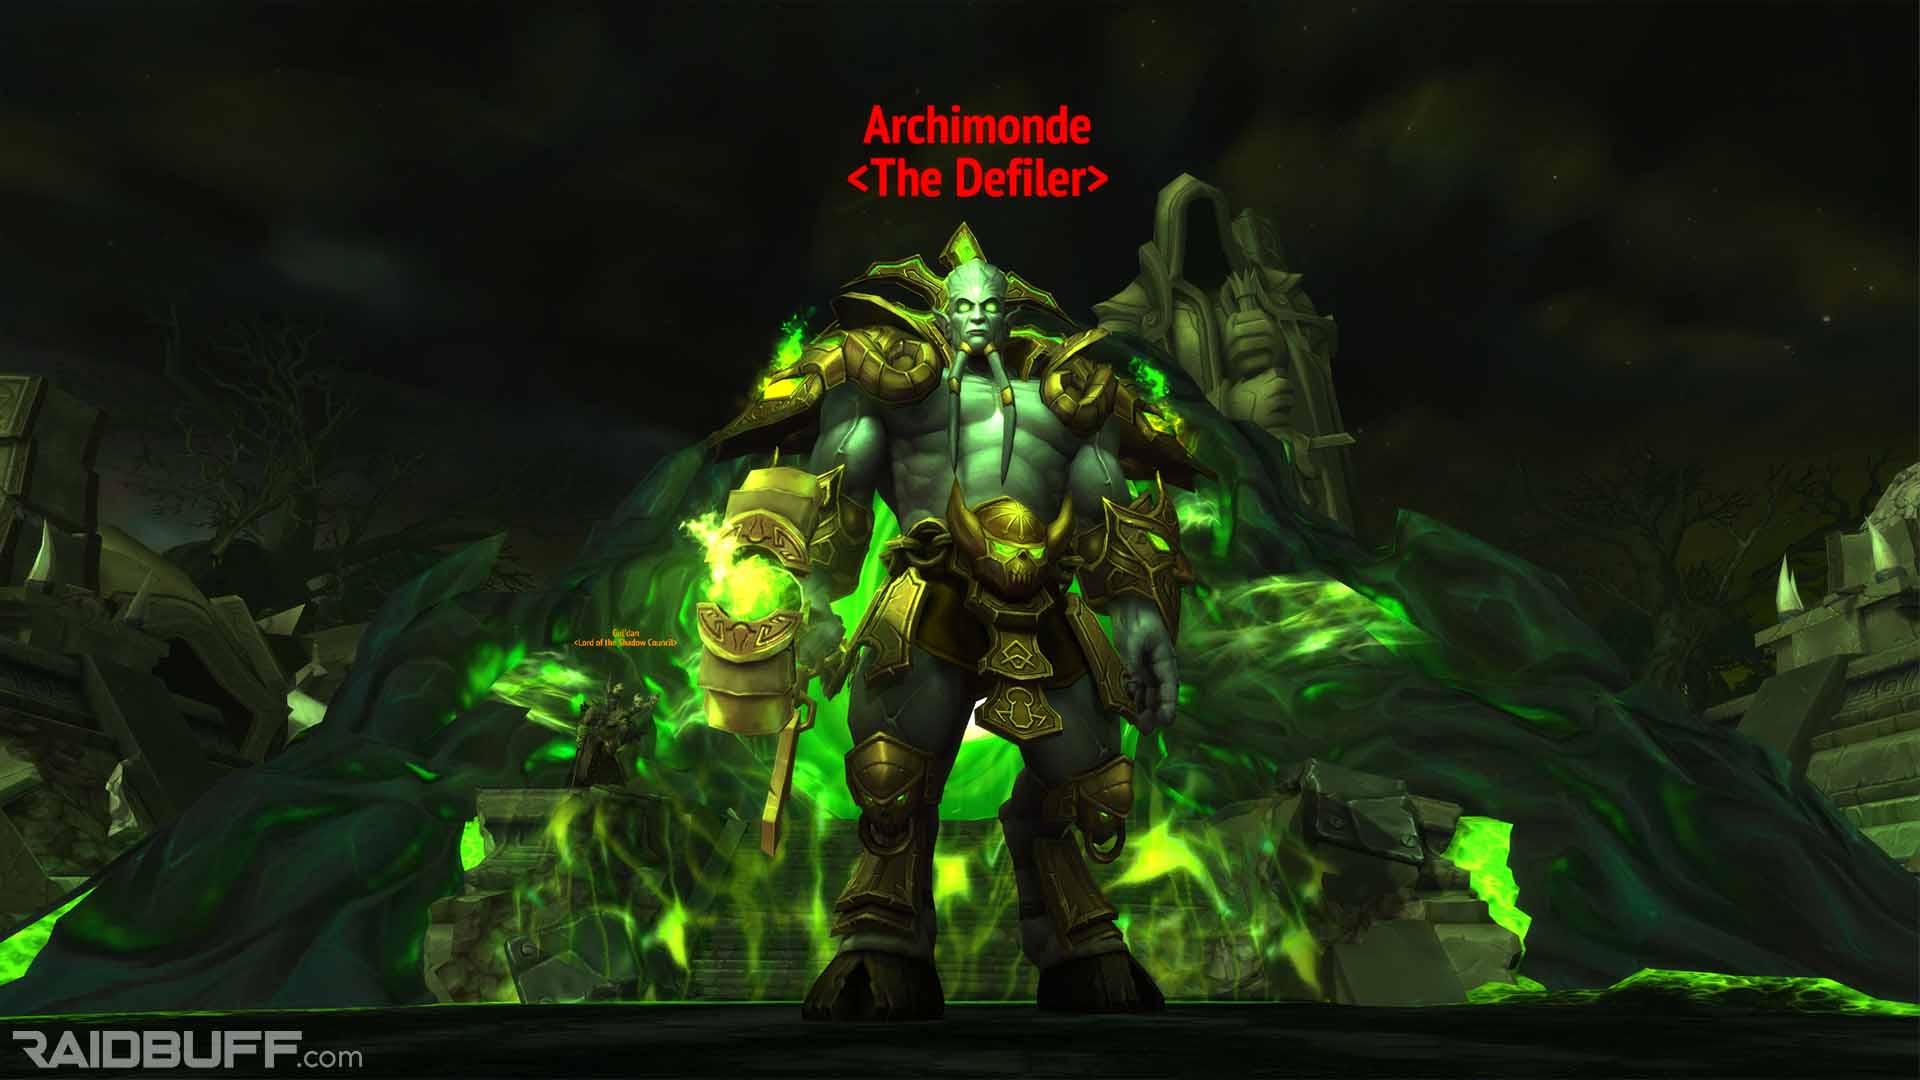 Archimonde, the final boss of Hellfire Citadel in Warlords of Draenor